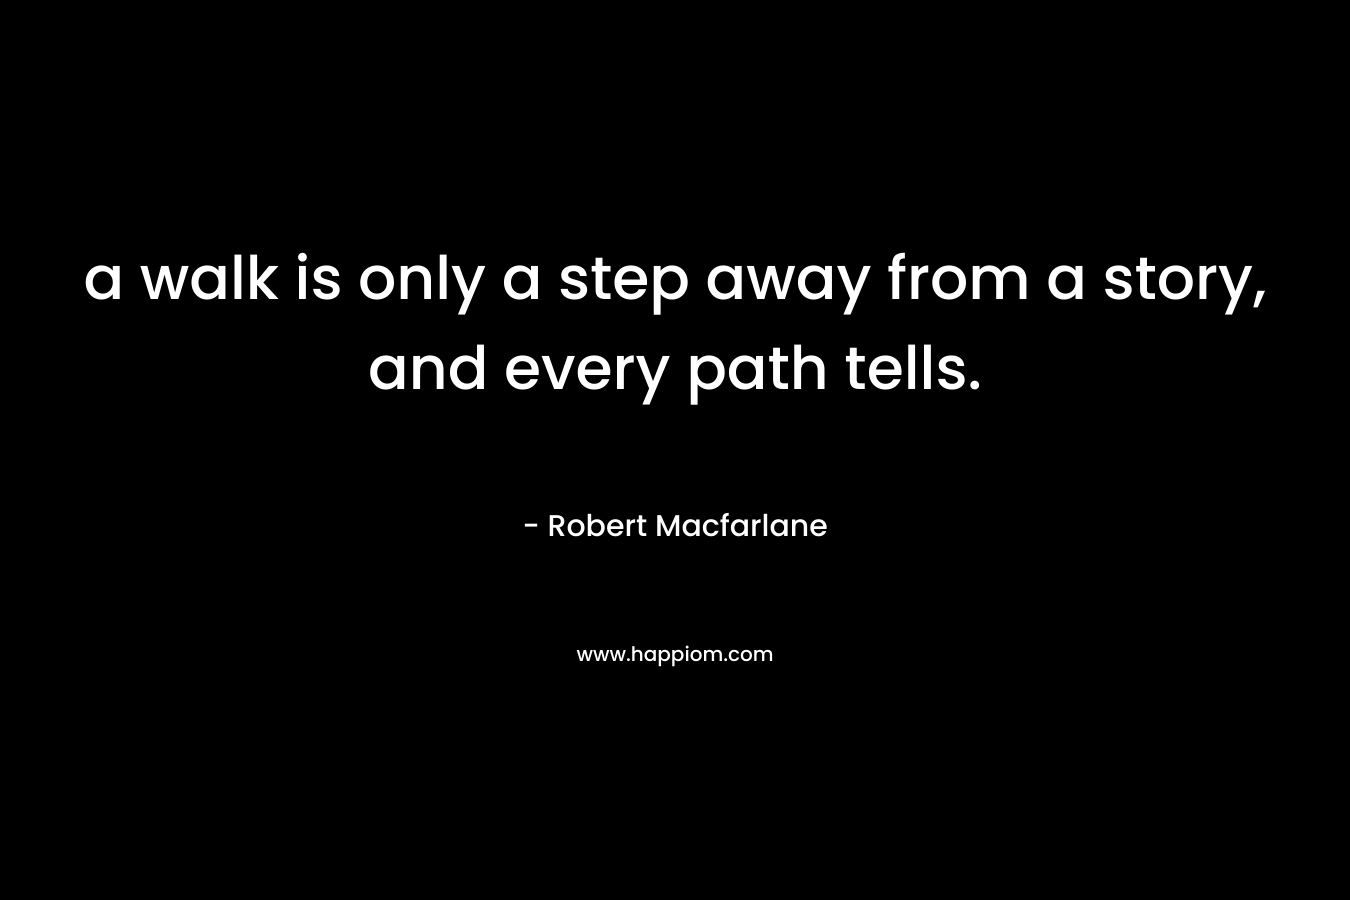 a walk is only a step away from a story, and every path tells.